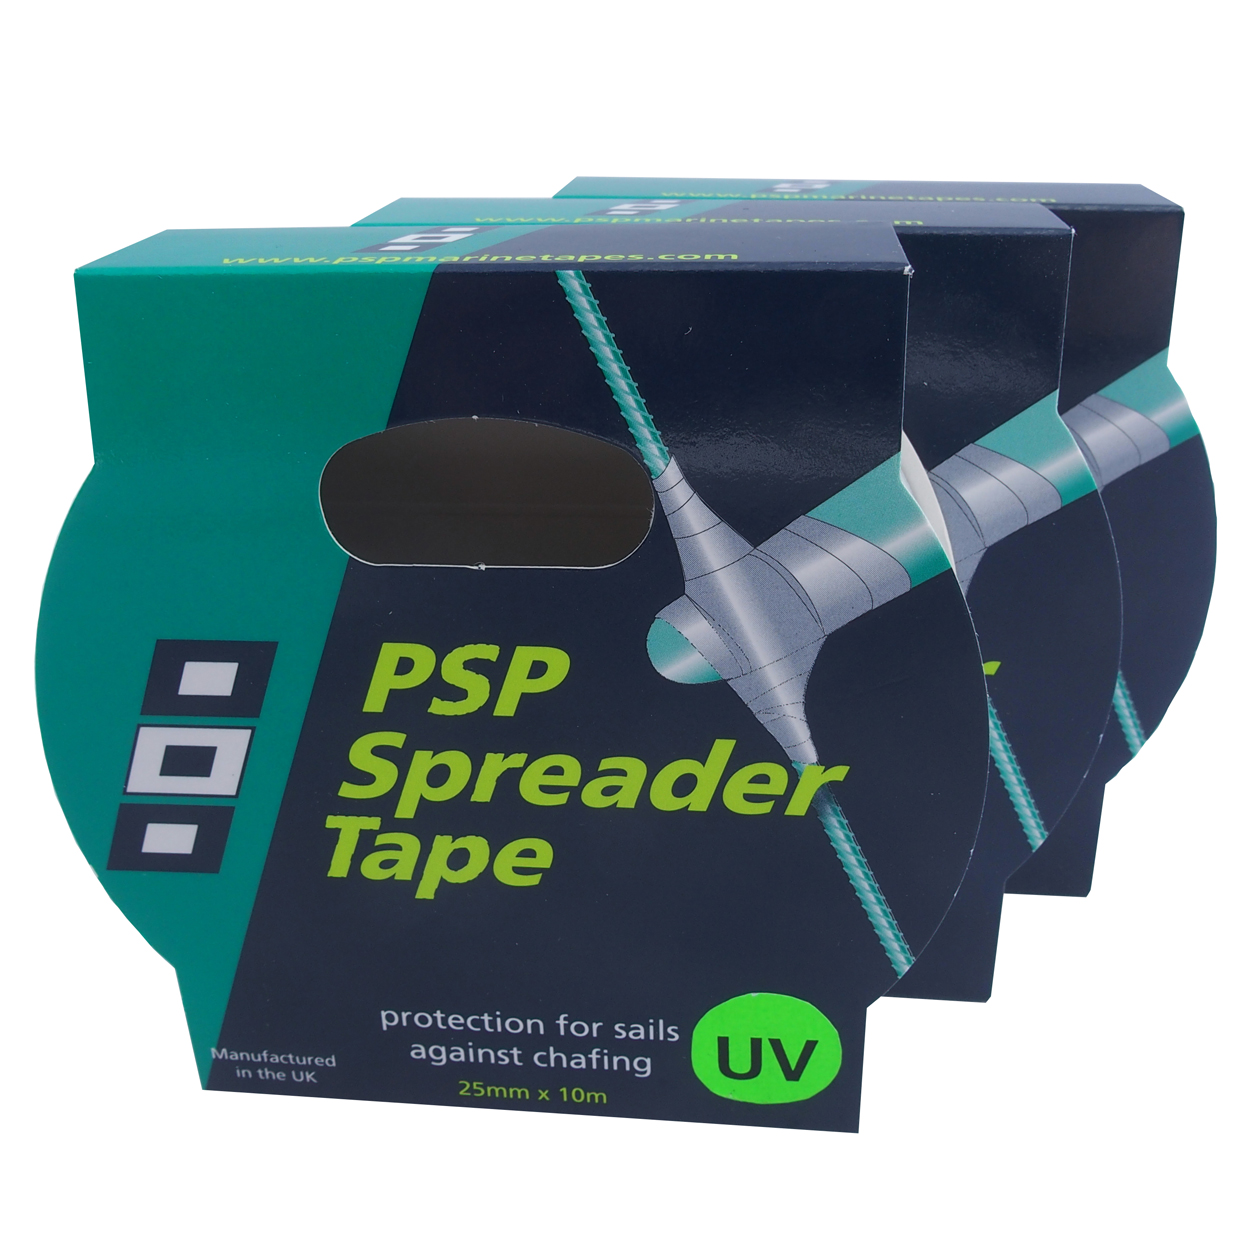 PSP UV Resistant Spreader Tape - Removes cleanly after use